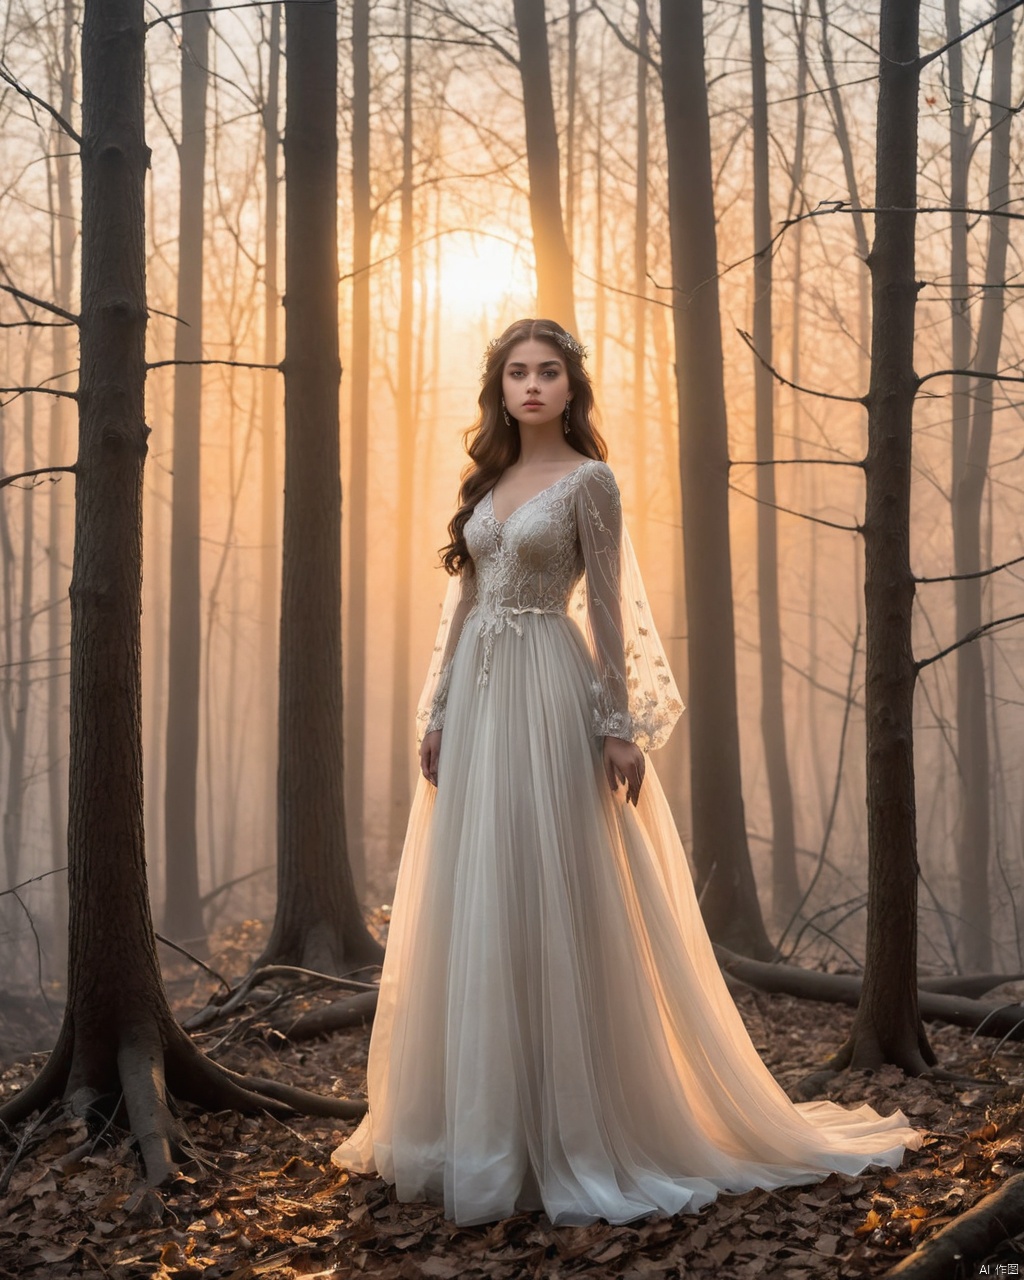 A hauntingly beautiful full-body Portrait of a beautiful 18-year-old girl, radiating seductive charm and poise. 
The woman's enigmatic gaze captivates the viewer as she stands amidst a misty, enchanting forest. The sun casts a breathtakingly beautiful sunset hue over the scene, creating a perfect contrast of light and darkness. The artist's painstaking attention to details brings the forest alive, with each leaf, branch, and ray of light meticulously rendered.